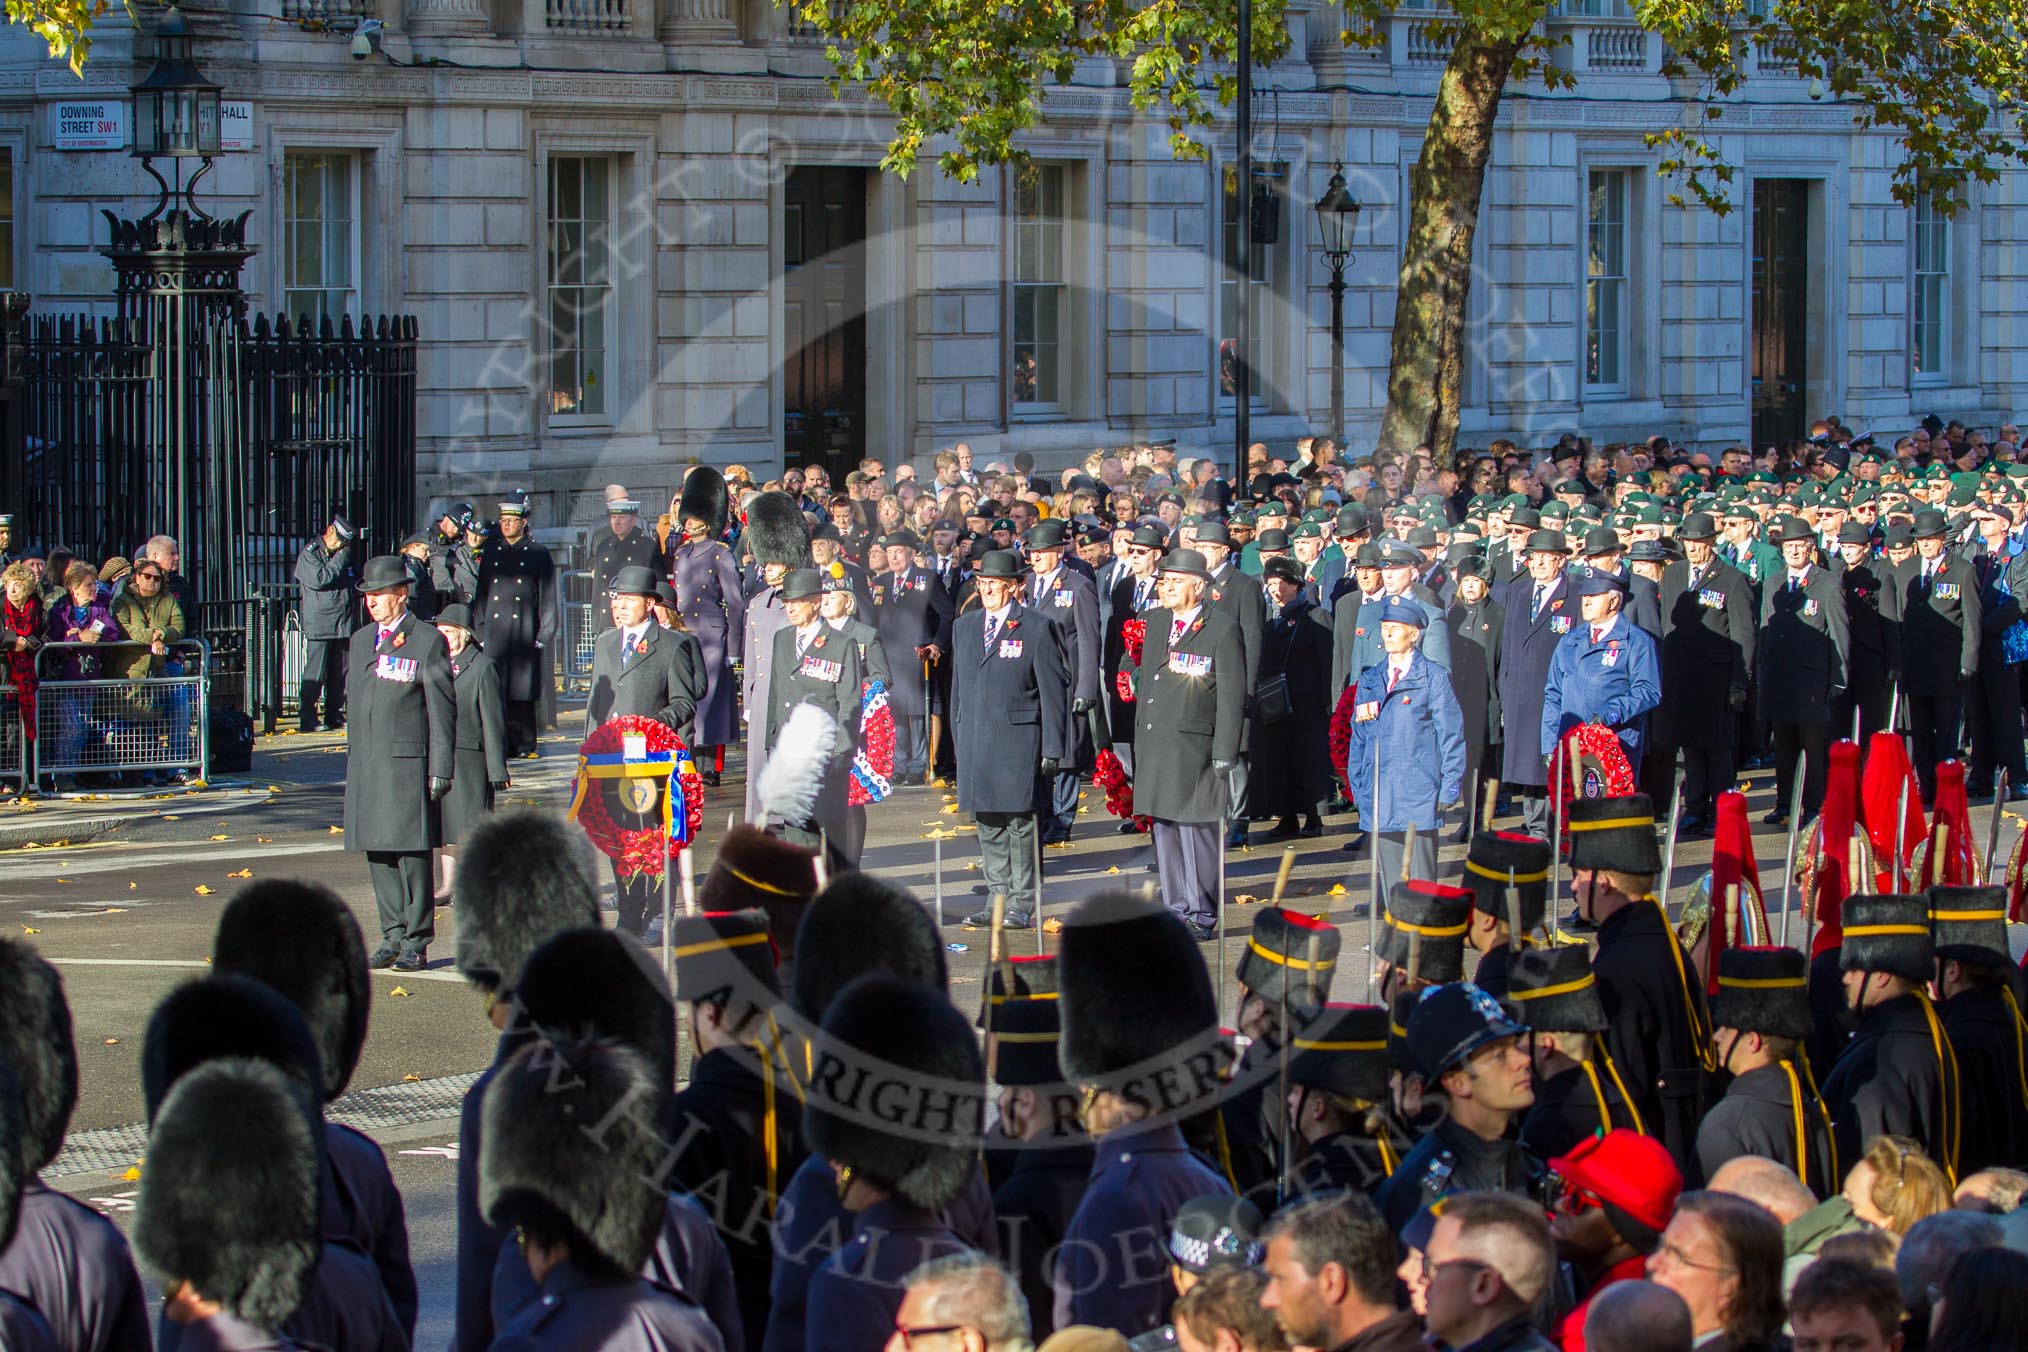 Representatives of The Royal British Legion, London Transport, the Royal Air Forces Association , the Royal Naval Association , the Royal Commonwealth Ex-­Services League, the Royal British Legion Scotland, and the Royal British Legion Women's Section waiting to lay their wreaths at the Cenotaph during the Remembrance Sunday Cenotaph Ceremony 2018 at Horse Guards Parade, Westminster, London, 11 November 2018, 11:26.